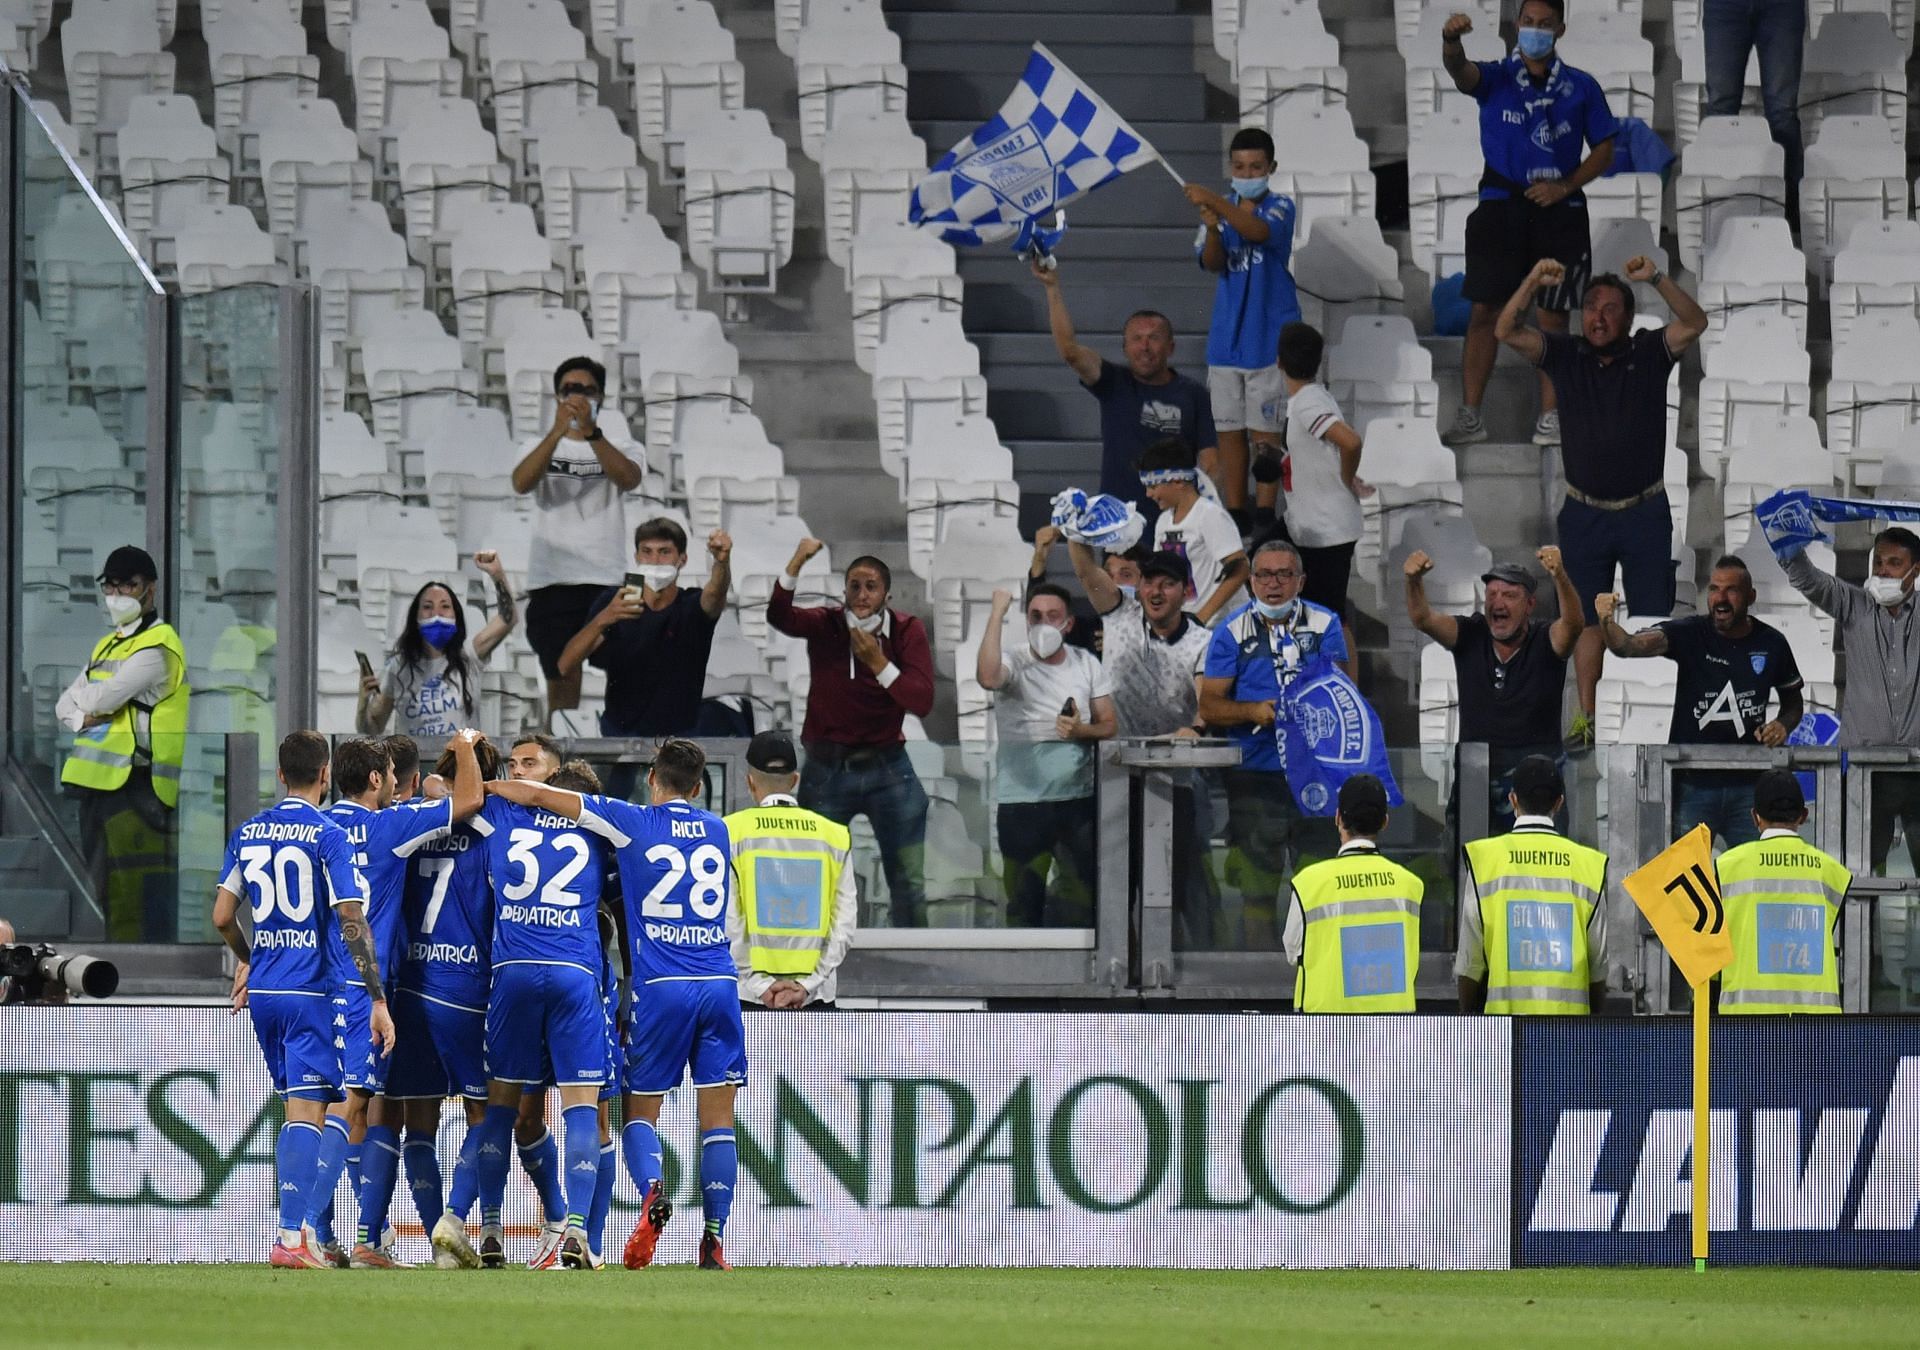 Empoli will look to win the game